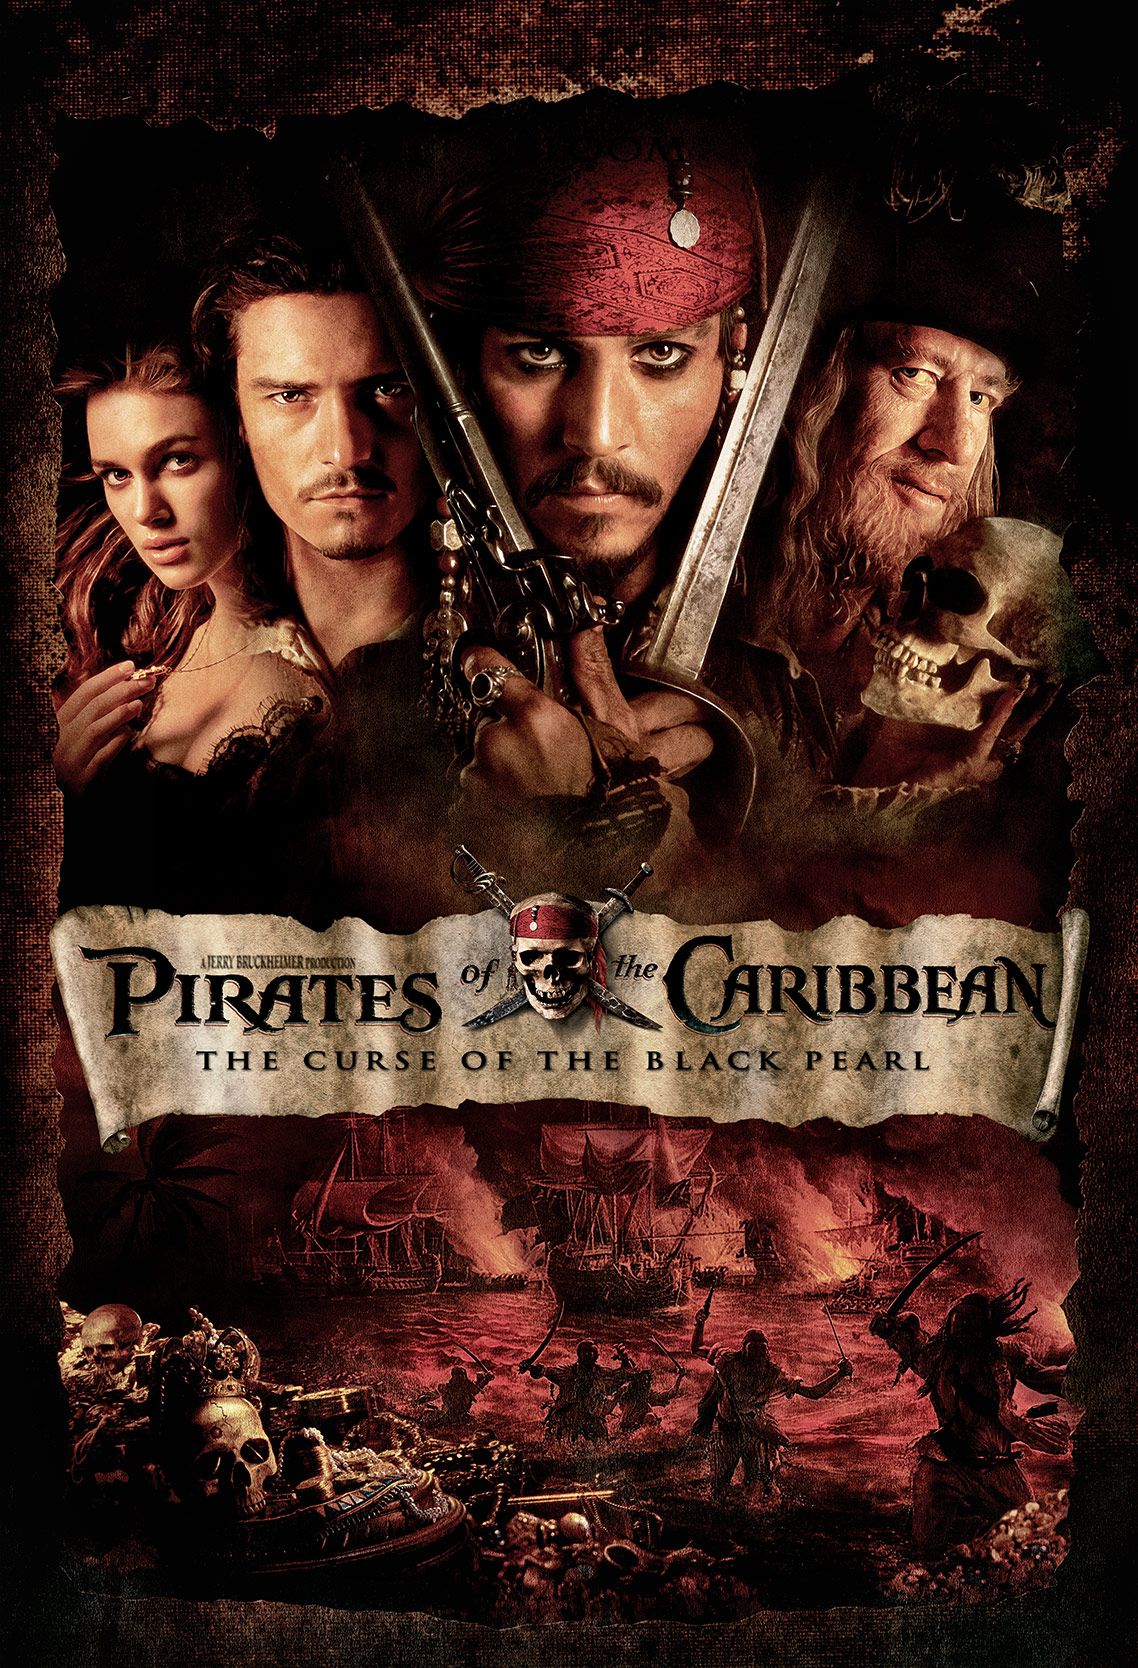 PIRATES OF THE CARIBBEAN • THE CURSE OF THE BLACK PEARL • Poster Art